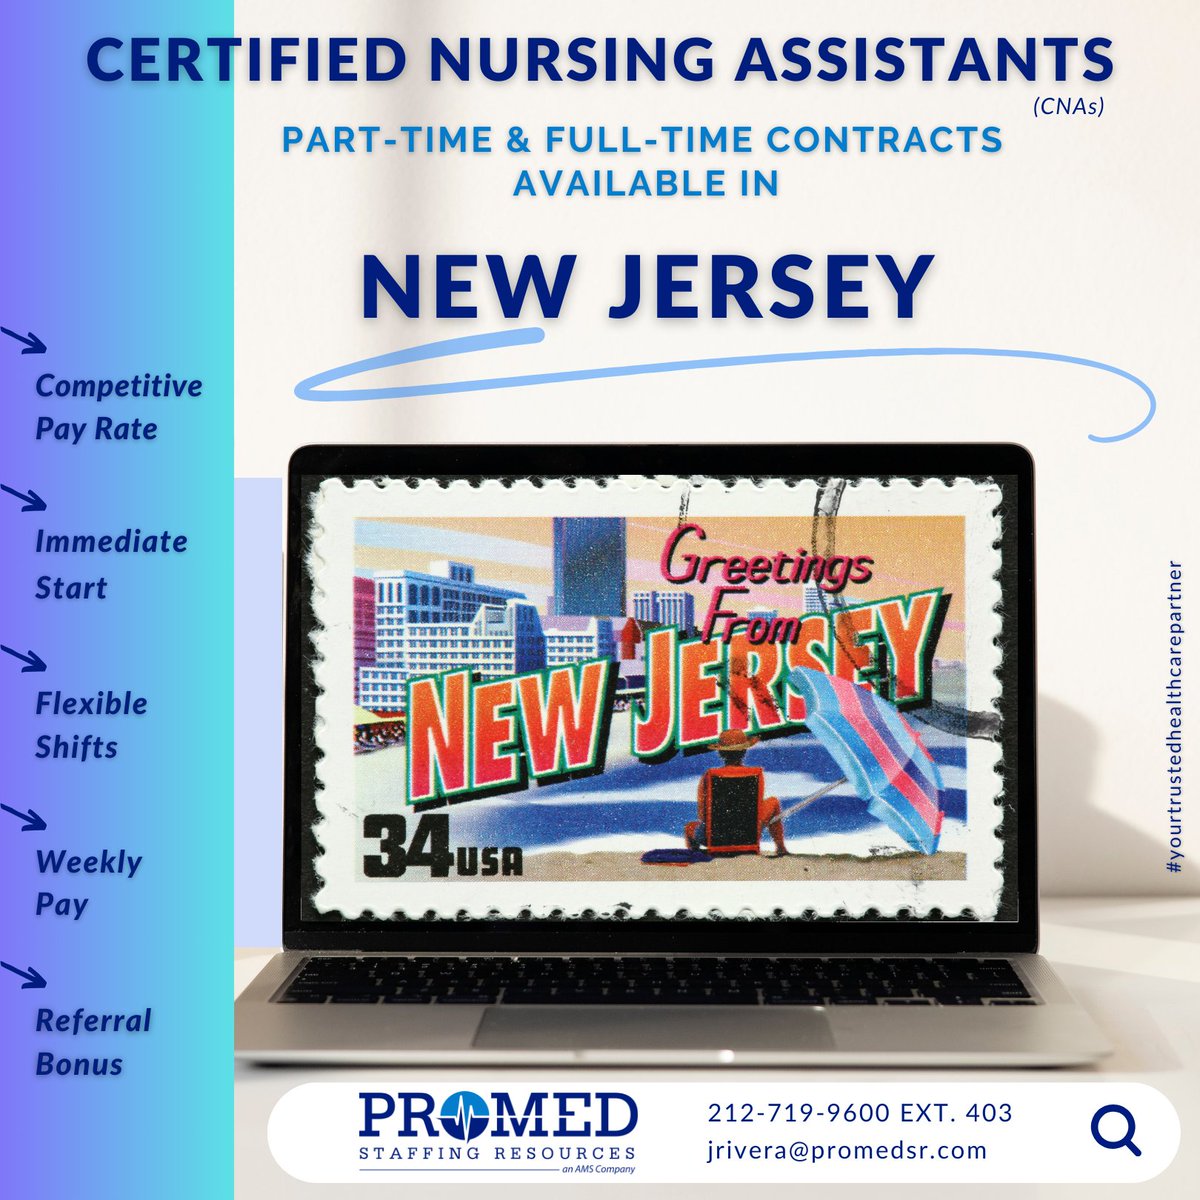 We are seeking #CNAs to join #longtermcarefacilities across the garden #state. Contact Jorell Rivera at (212) 719-9600 or email your resume to jrivera@promedsr.com to get matched

#cna #certifiednursingassisstant #cnainnewjersey #newjerseyjobs #njjobs #cnajobs #promed #promedsr